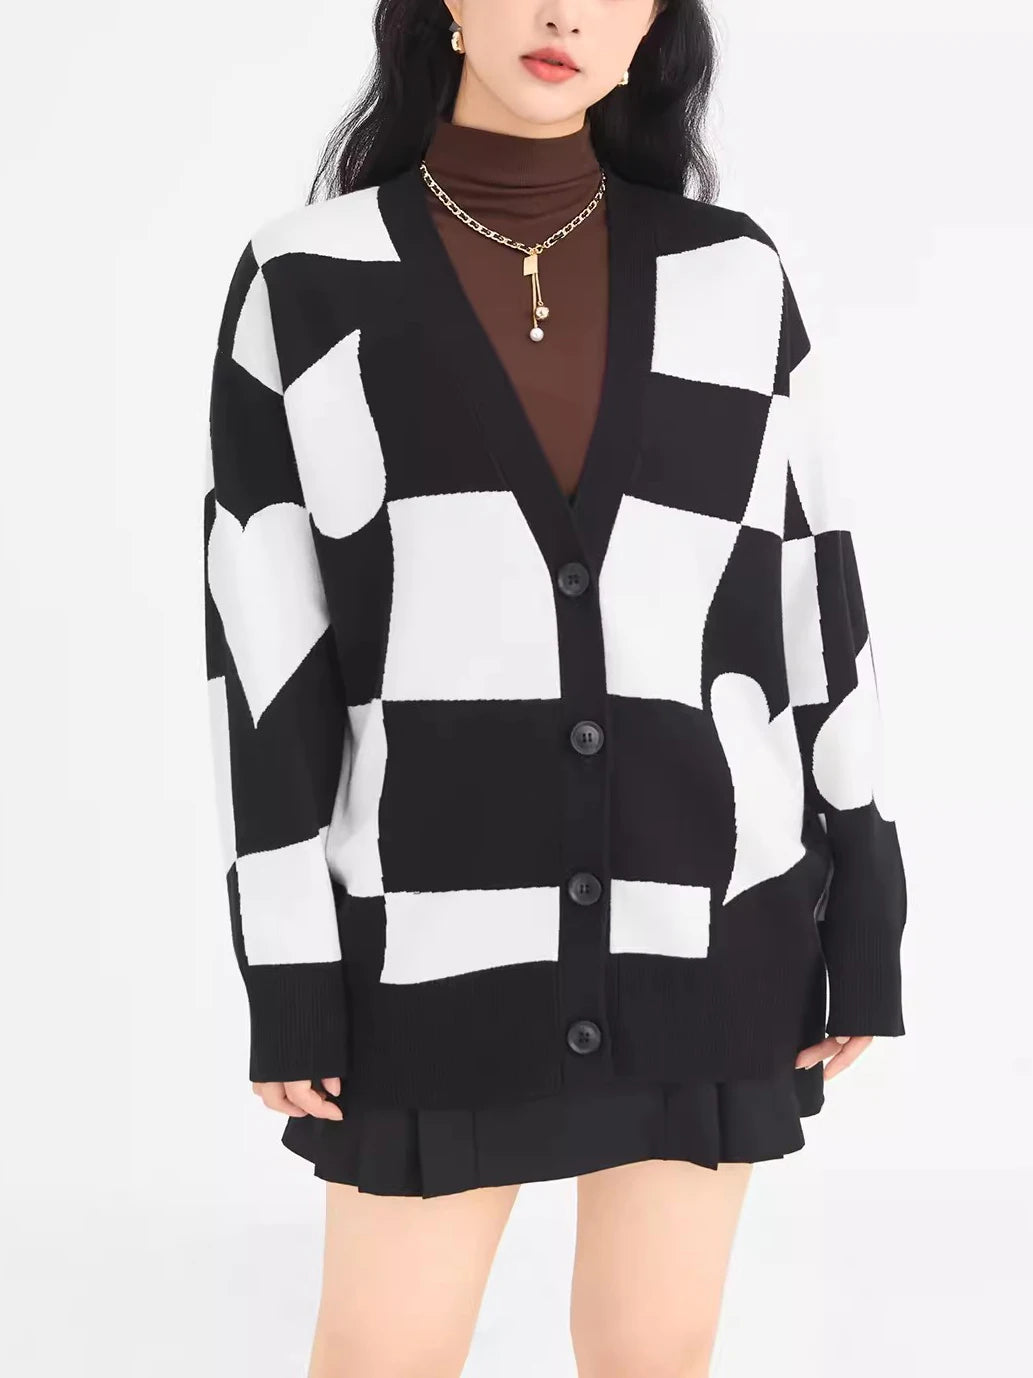 Soliaten V-neck Plaid Checkerboard Oversized Cardigan Women Autumn Winter Single Breasted Ladies Long Sweter Jumper  C-174